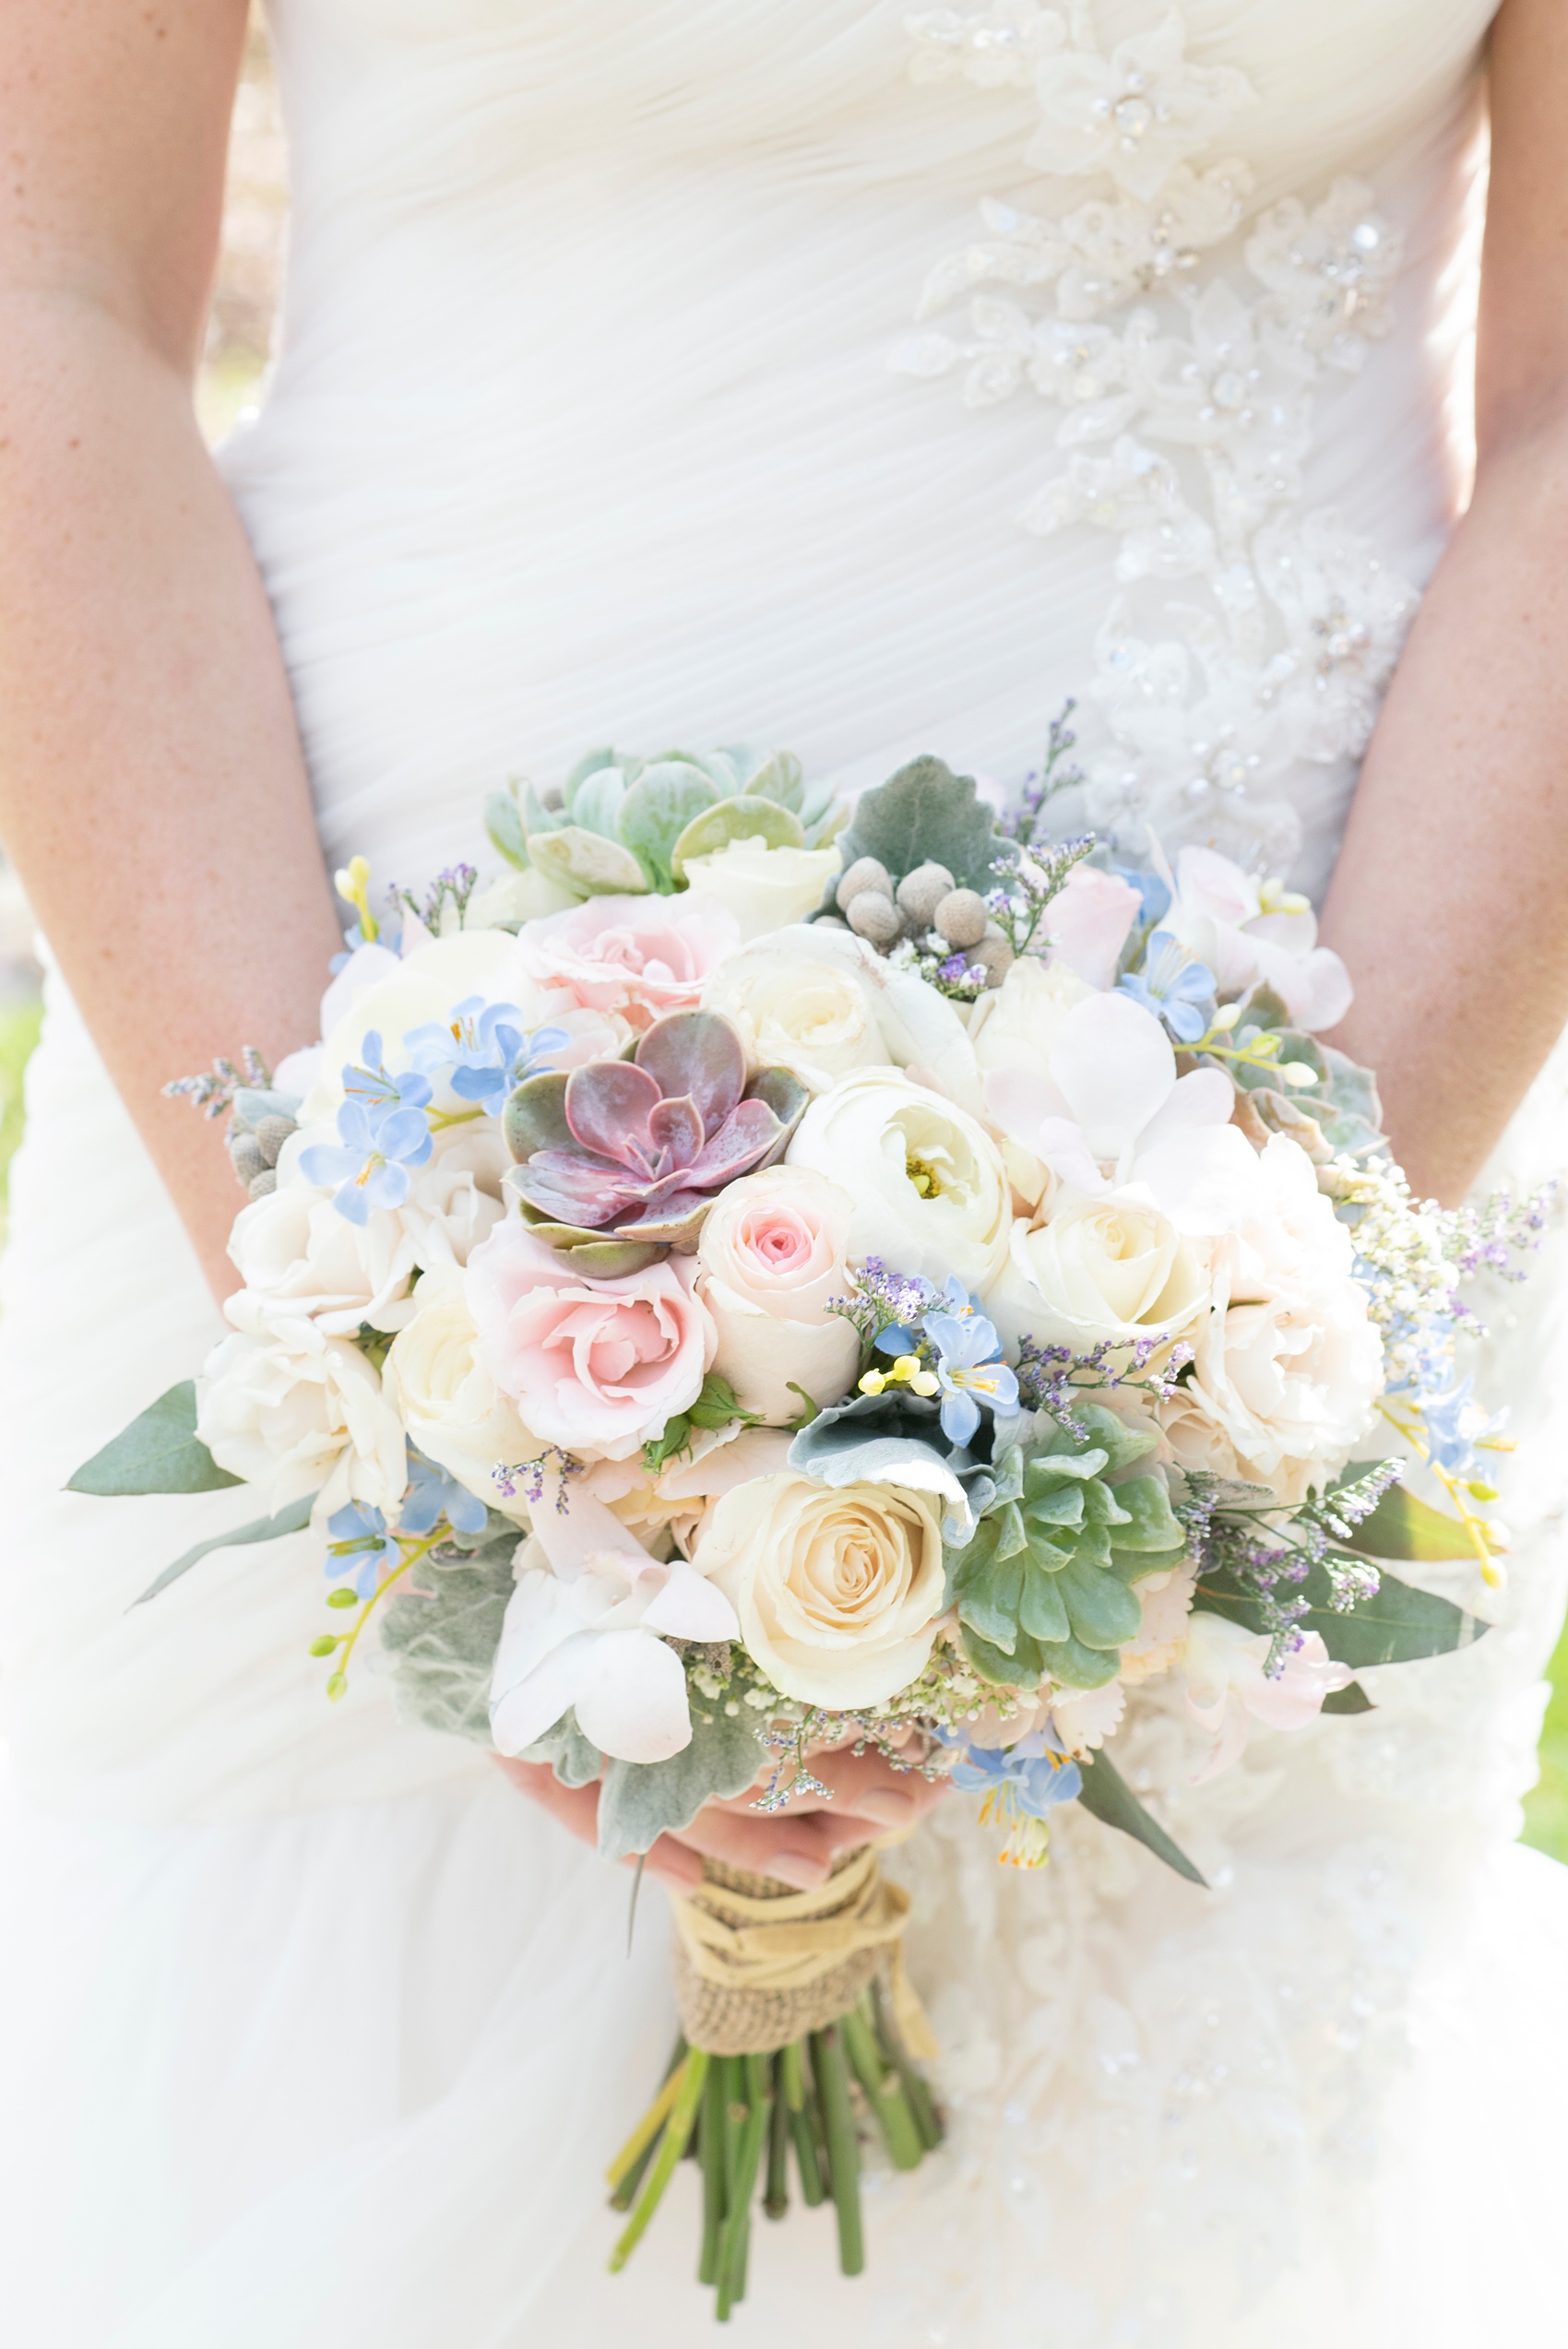 Crystal Springs Resort wedding photos by Mikkel Paige Photography in New Jersey.  The bride carried a bouquet of spring blossoms.